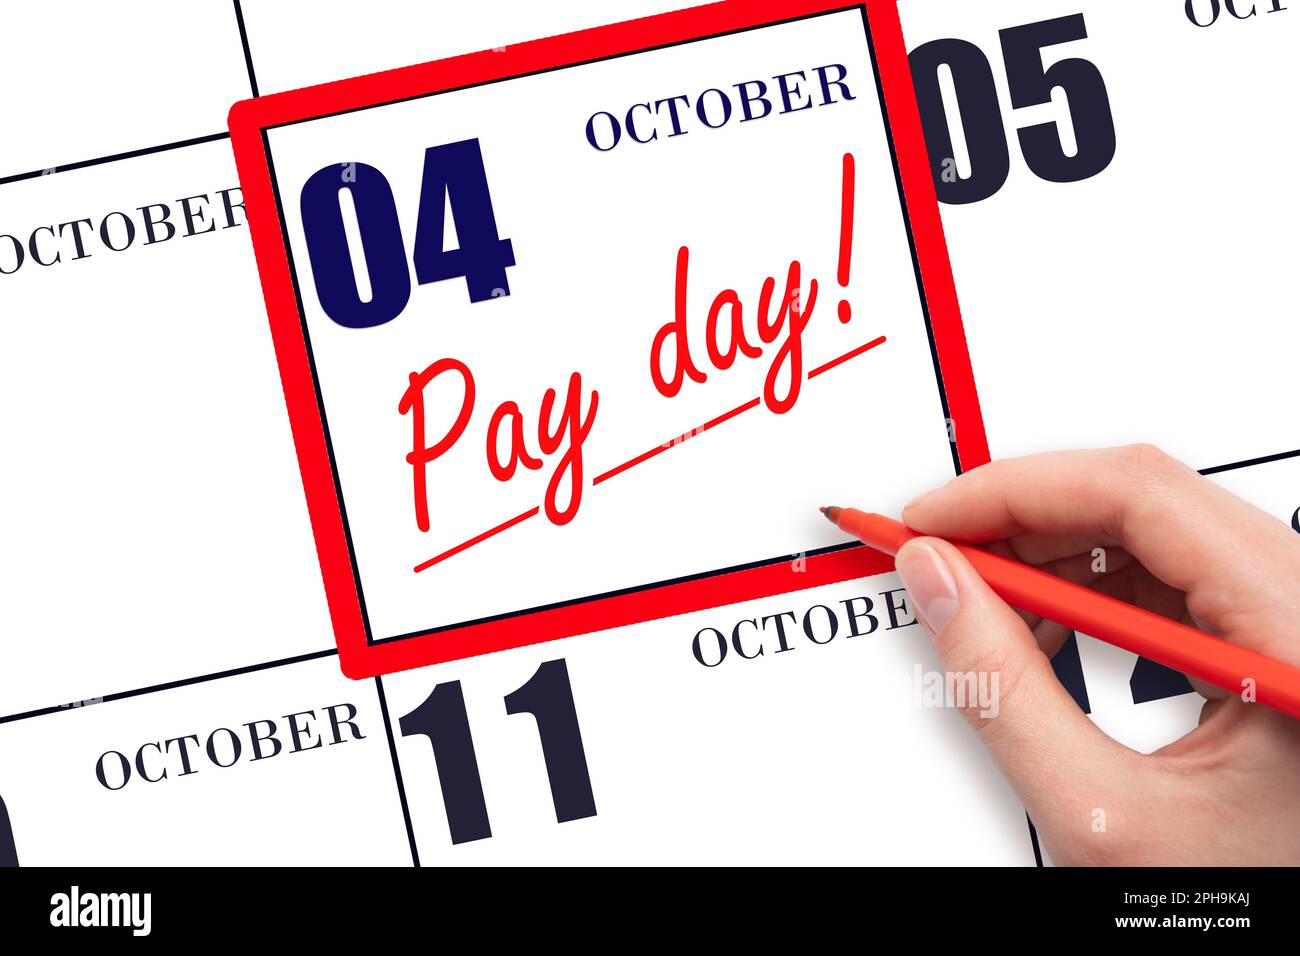 4th day of October. Hand writing text PAY DATE on calendar date October 4 and underline it. Payment due date.  Reminder concept of payment. Autumn mon Stock Photo